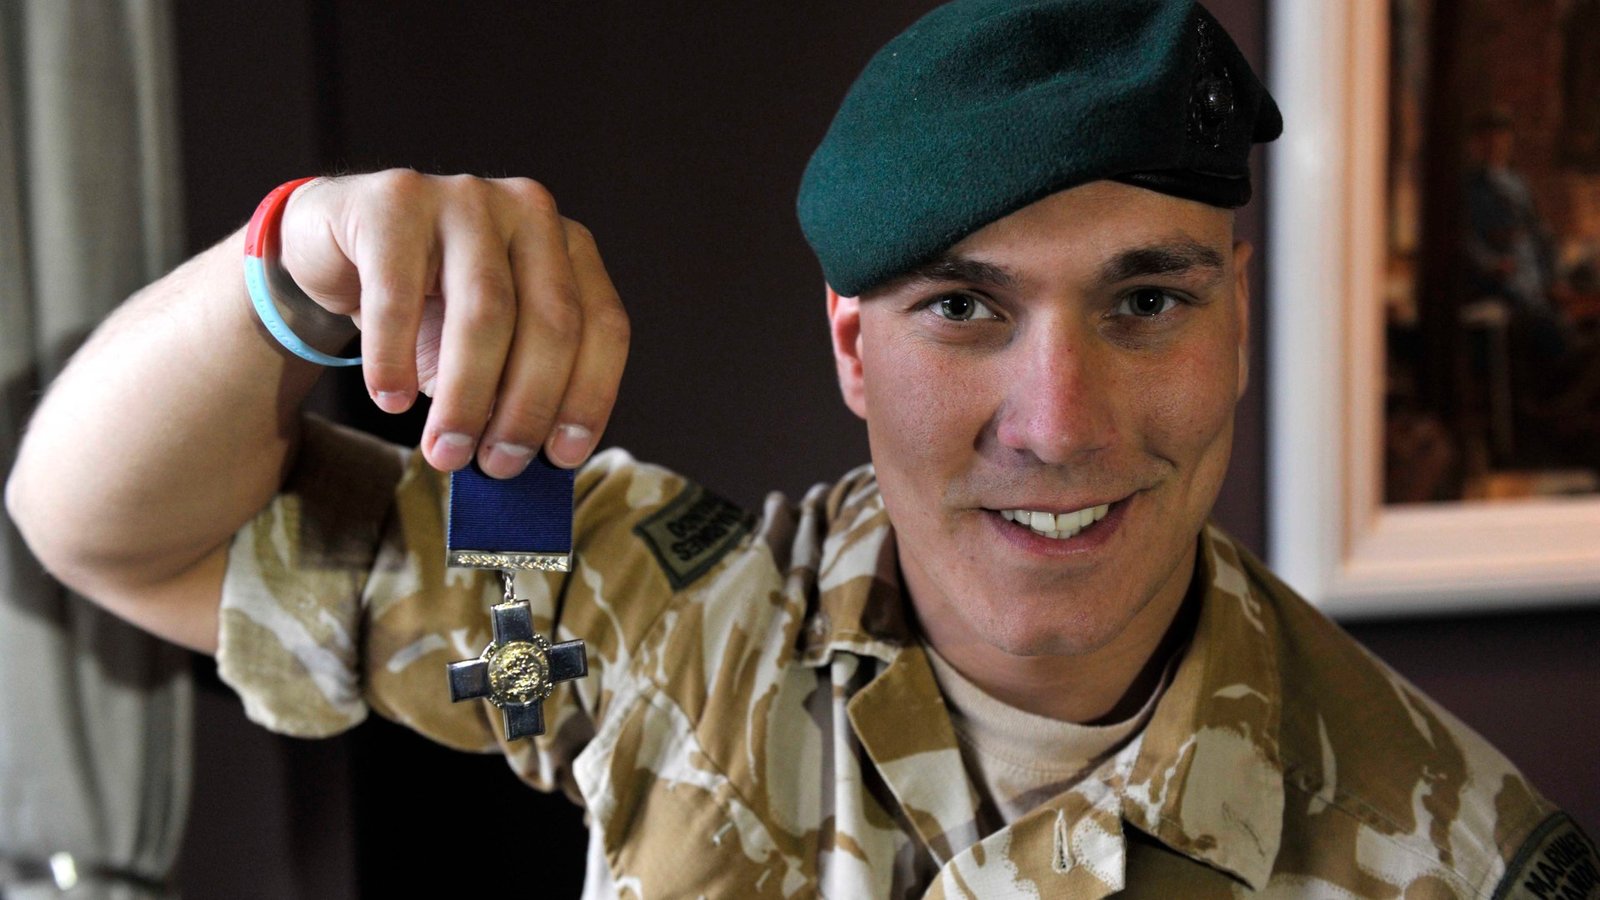 Decorated Royal Marine hero who saved comrades lives in Afghanistan arrested held in Dubai for 7 months for spying